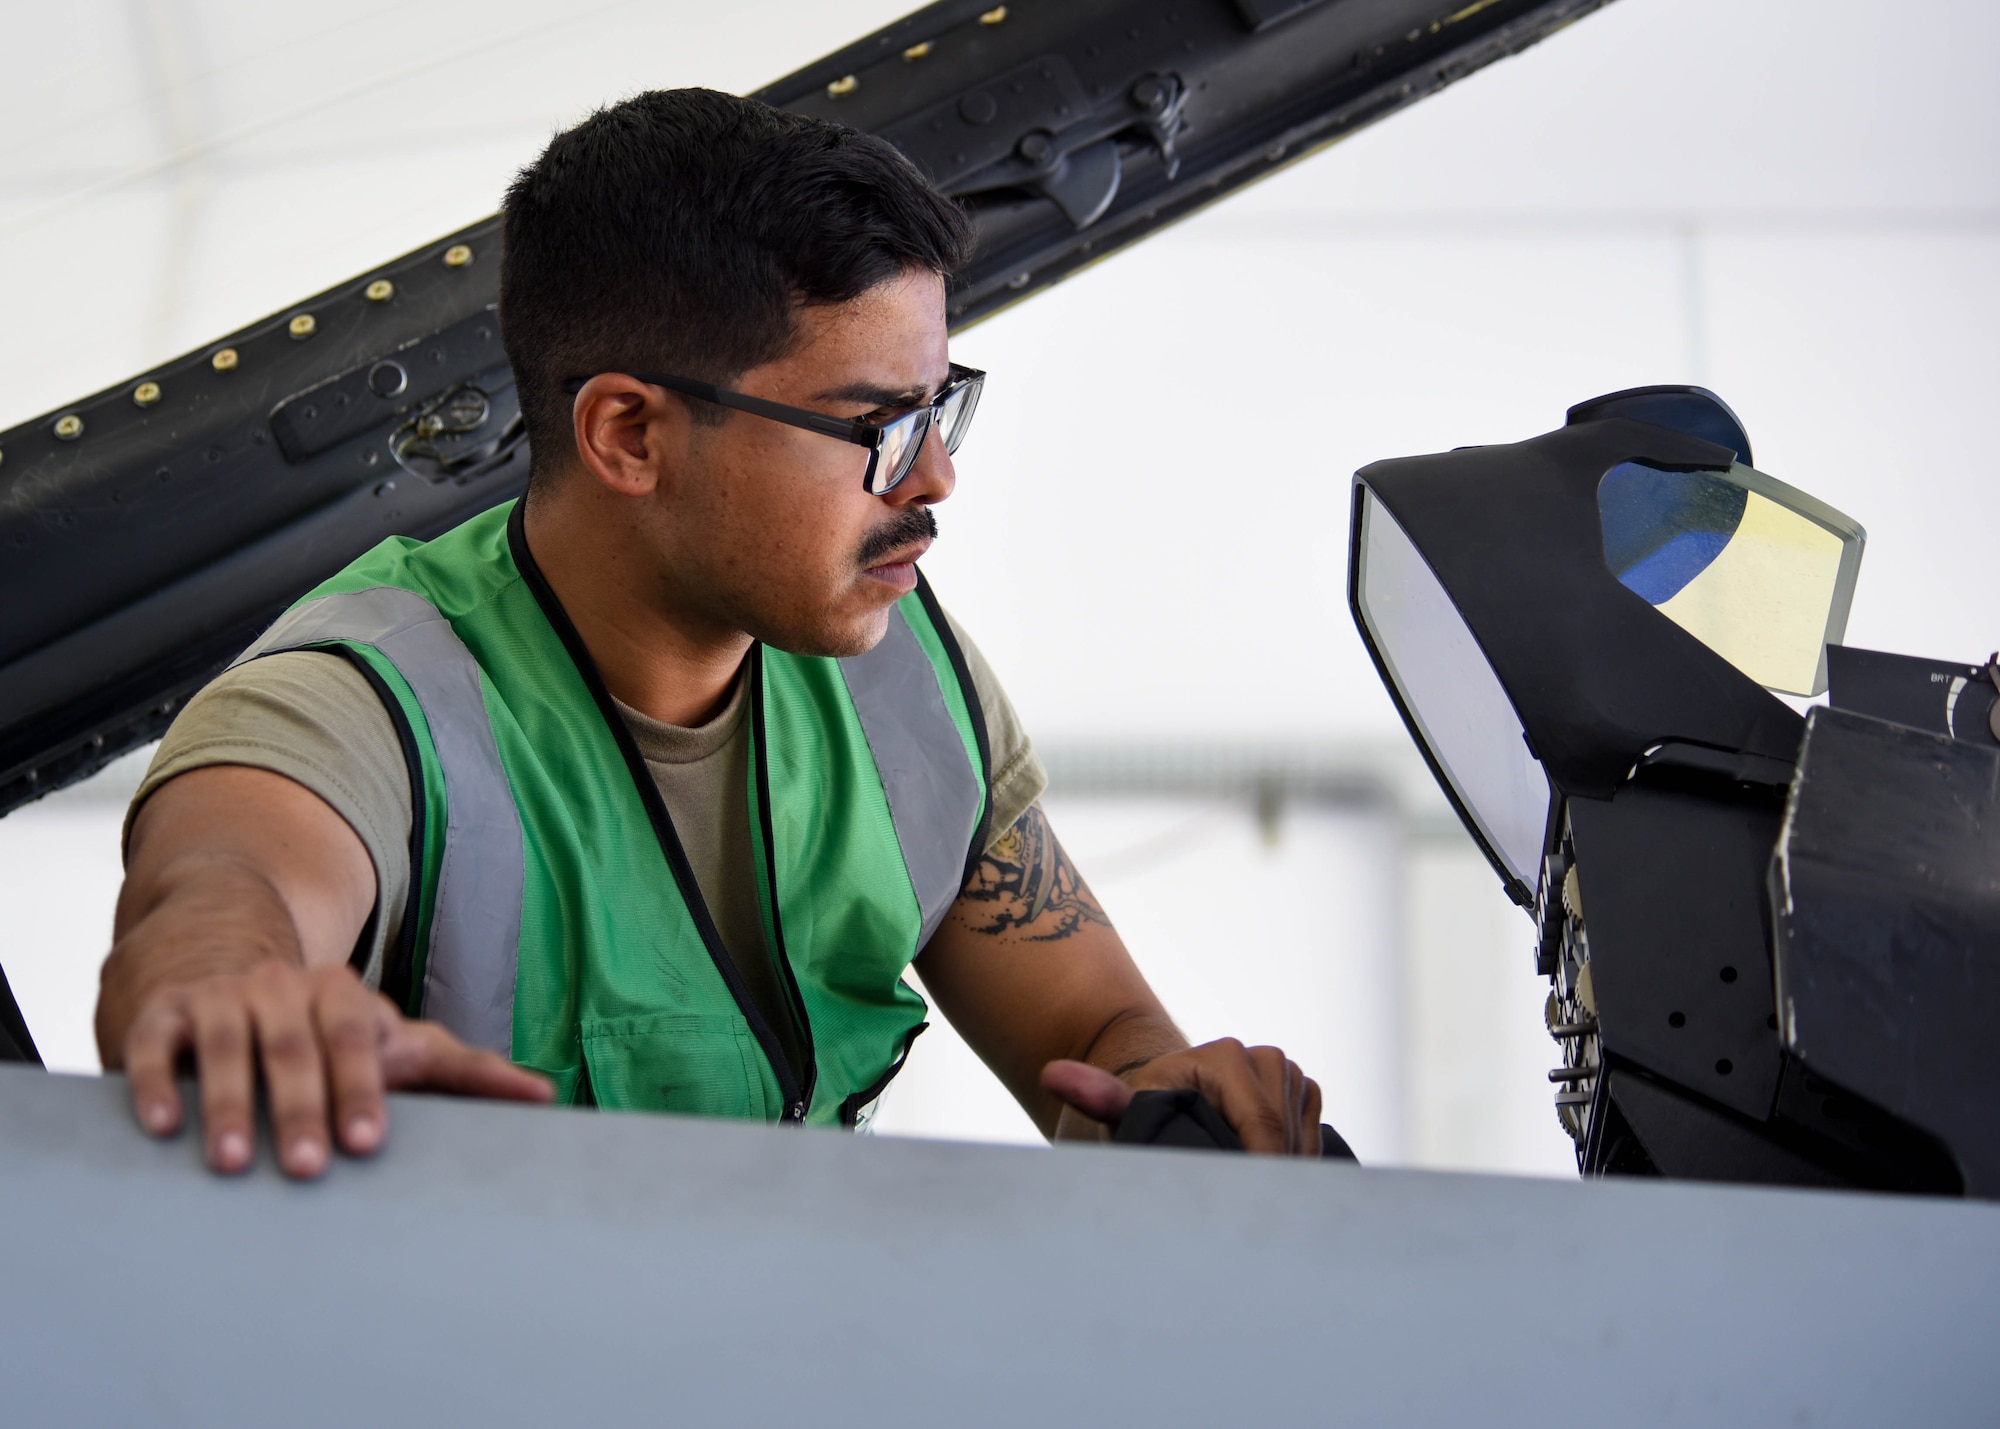 U.S. Air Force Staff Sgt. Michael Montez, 555th Aircraft Maintenance Unit F-16 Fighting Falcon crew chief, inspects a U.S. Air Force F-16 at Amendola Air Base, Italy, June 4, 2021. Approximately 600 personnel from the U.S. Air Force, U.S. Marine Corps, Italian air force, Israeli air force and the United Kingdom Royal air force are participating in Falcon Strike 21.(U.S. Air Force photo by Airman 1st Class Brooke Moeder)